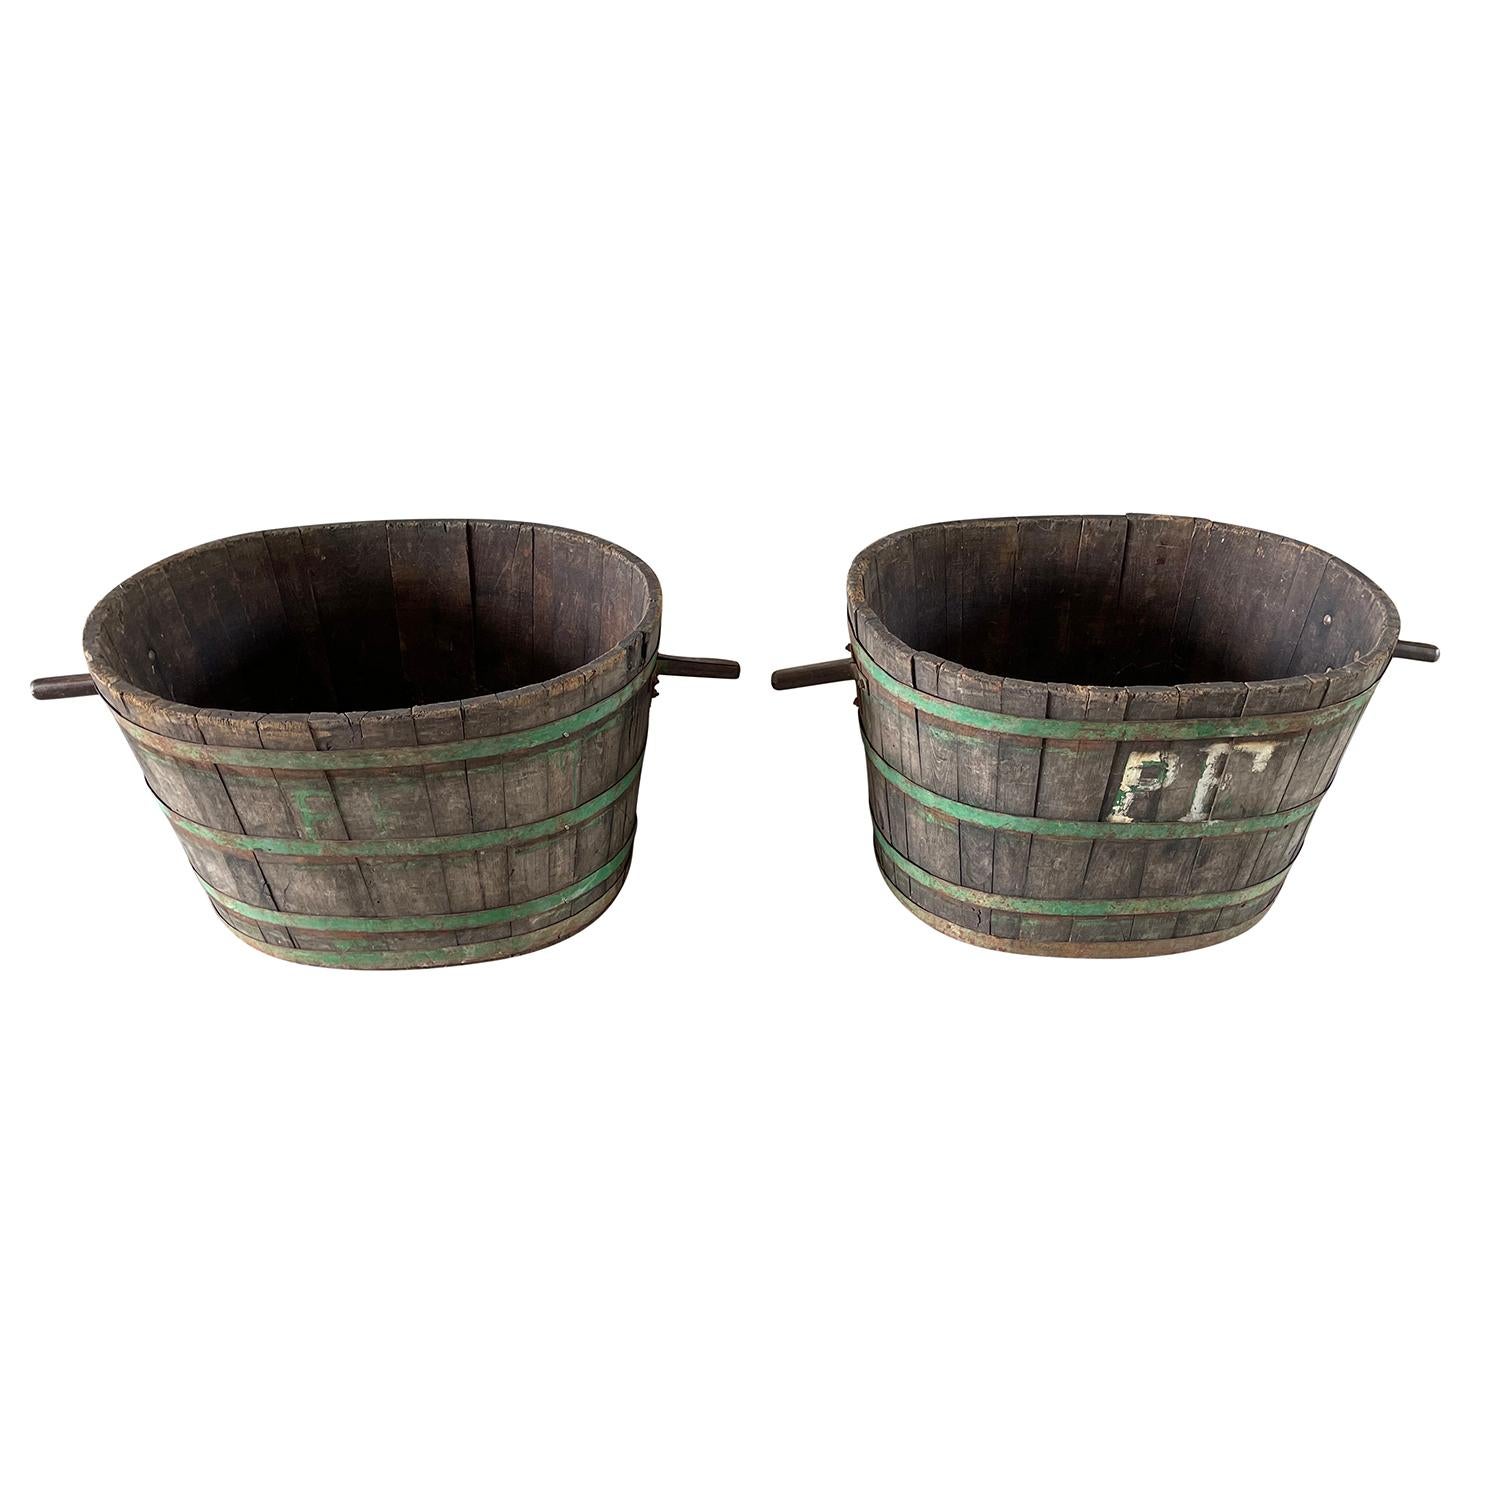 A pair of charming antique Oakwood large buckets or troughs with iron handles and green patinated iron bands, in good condition. These oval bins from Burgundy were typically used to collect grapes. The iron handles of the vessels were used to be